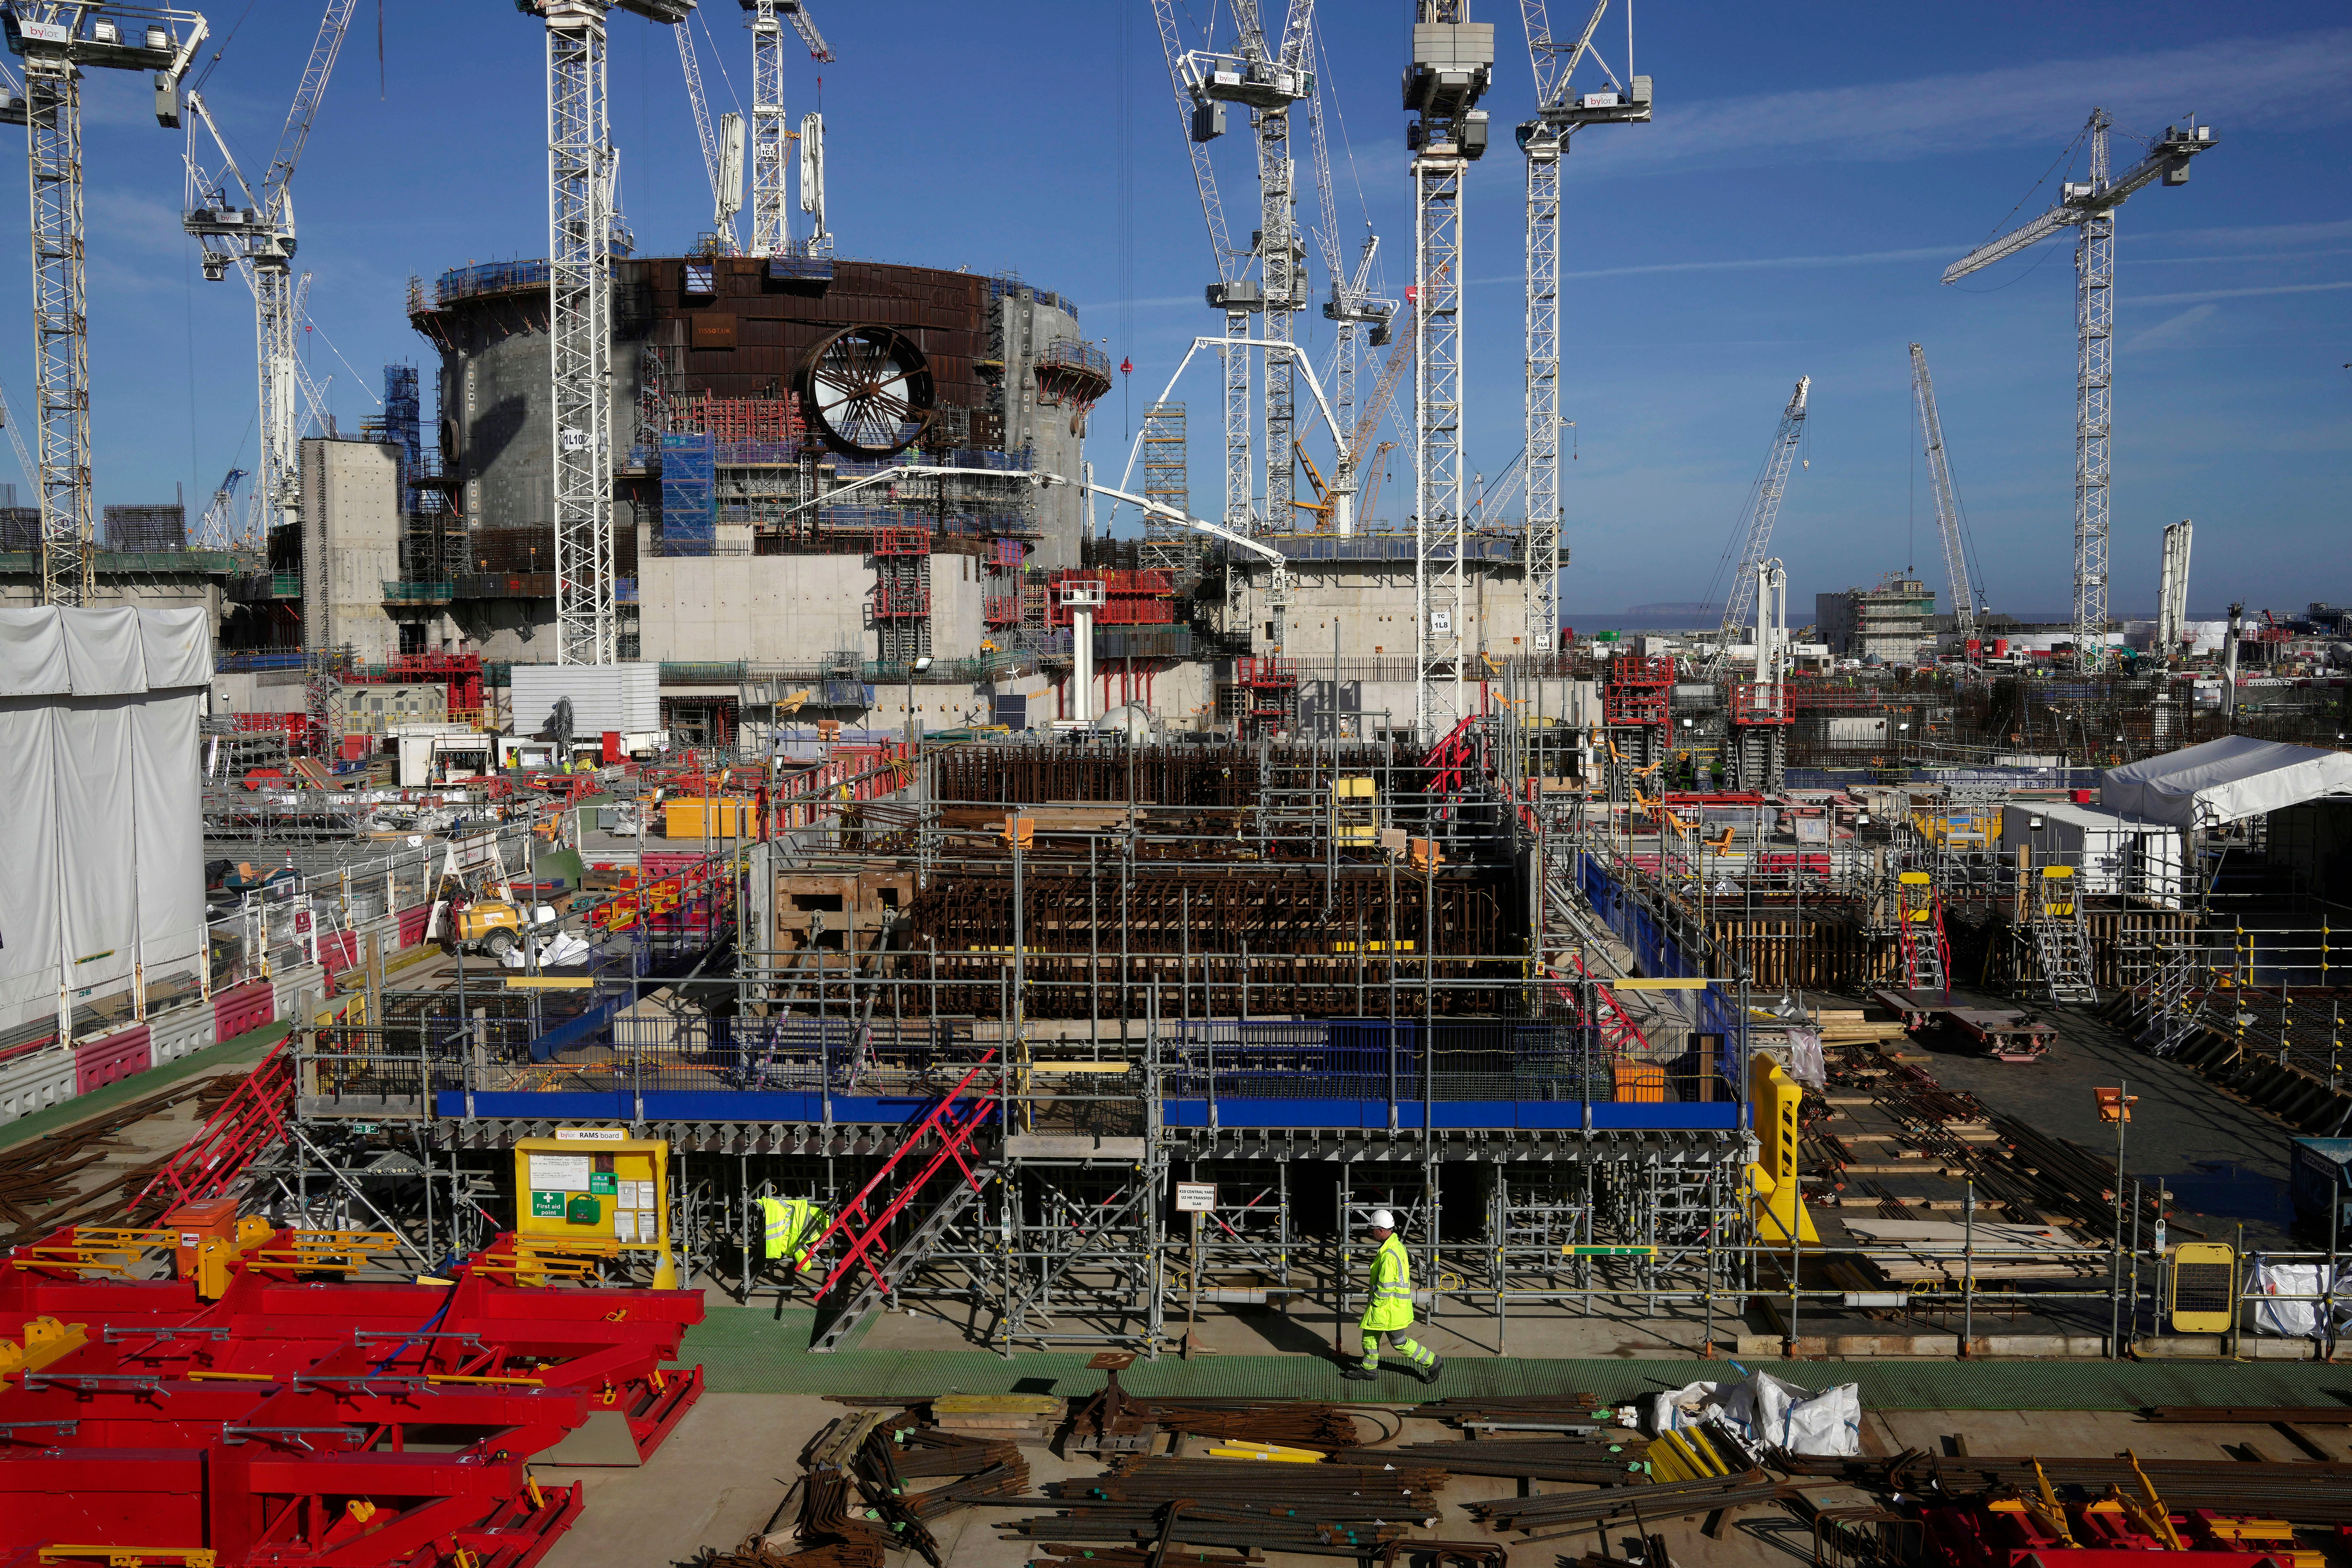 China General Nuclear (CGN) has been removed from Hinkley Point C development